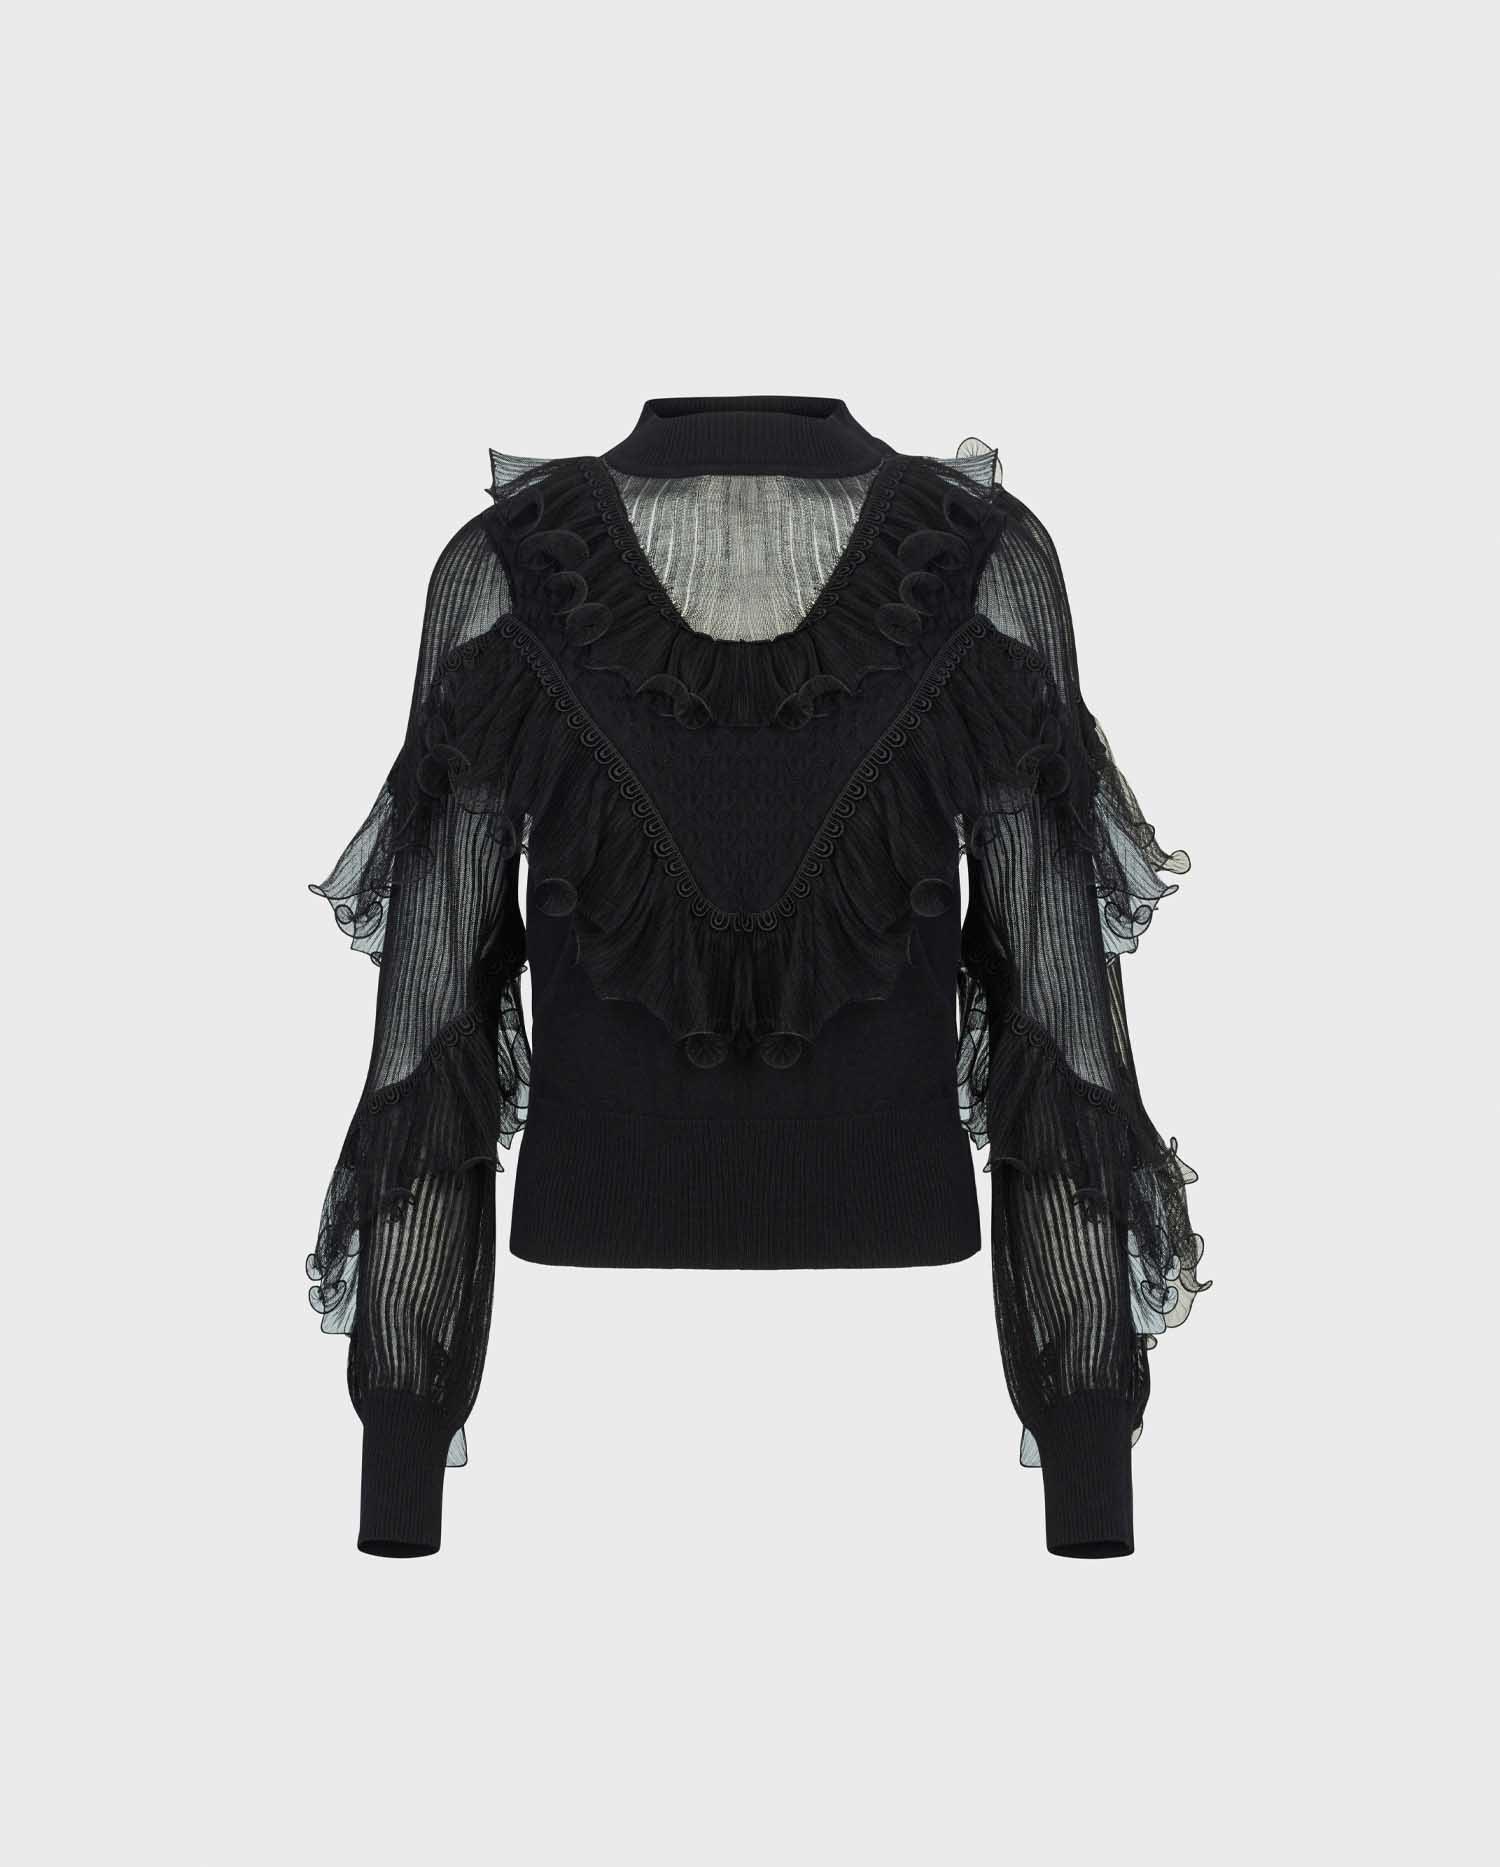 Discover the OEUVRE Long sleeve black knit with sheer details and cascading ruffles from ANNE FONTAINE